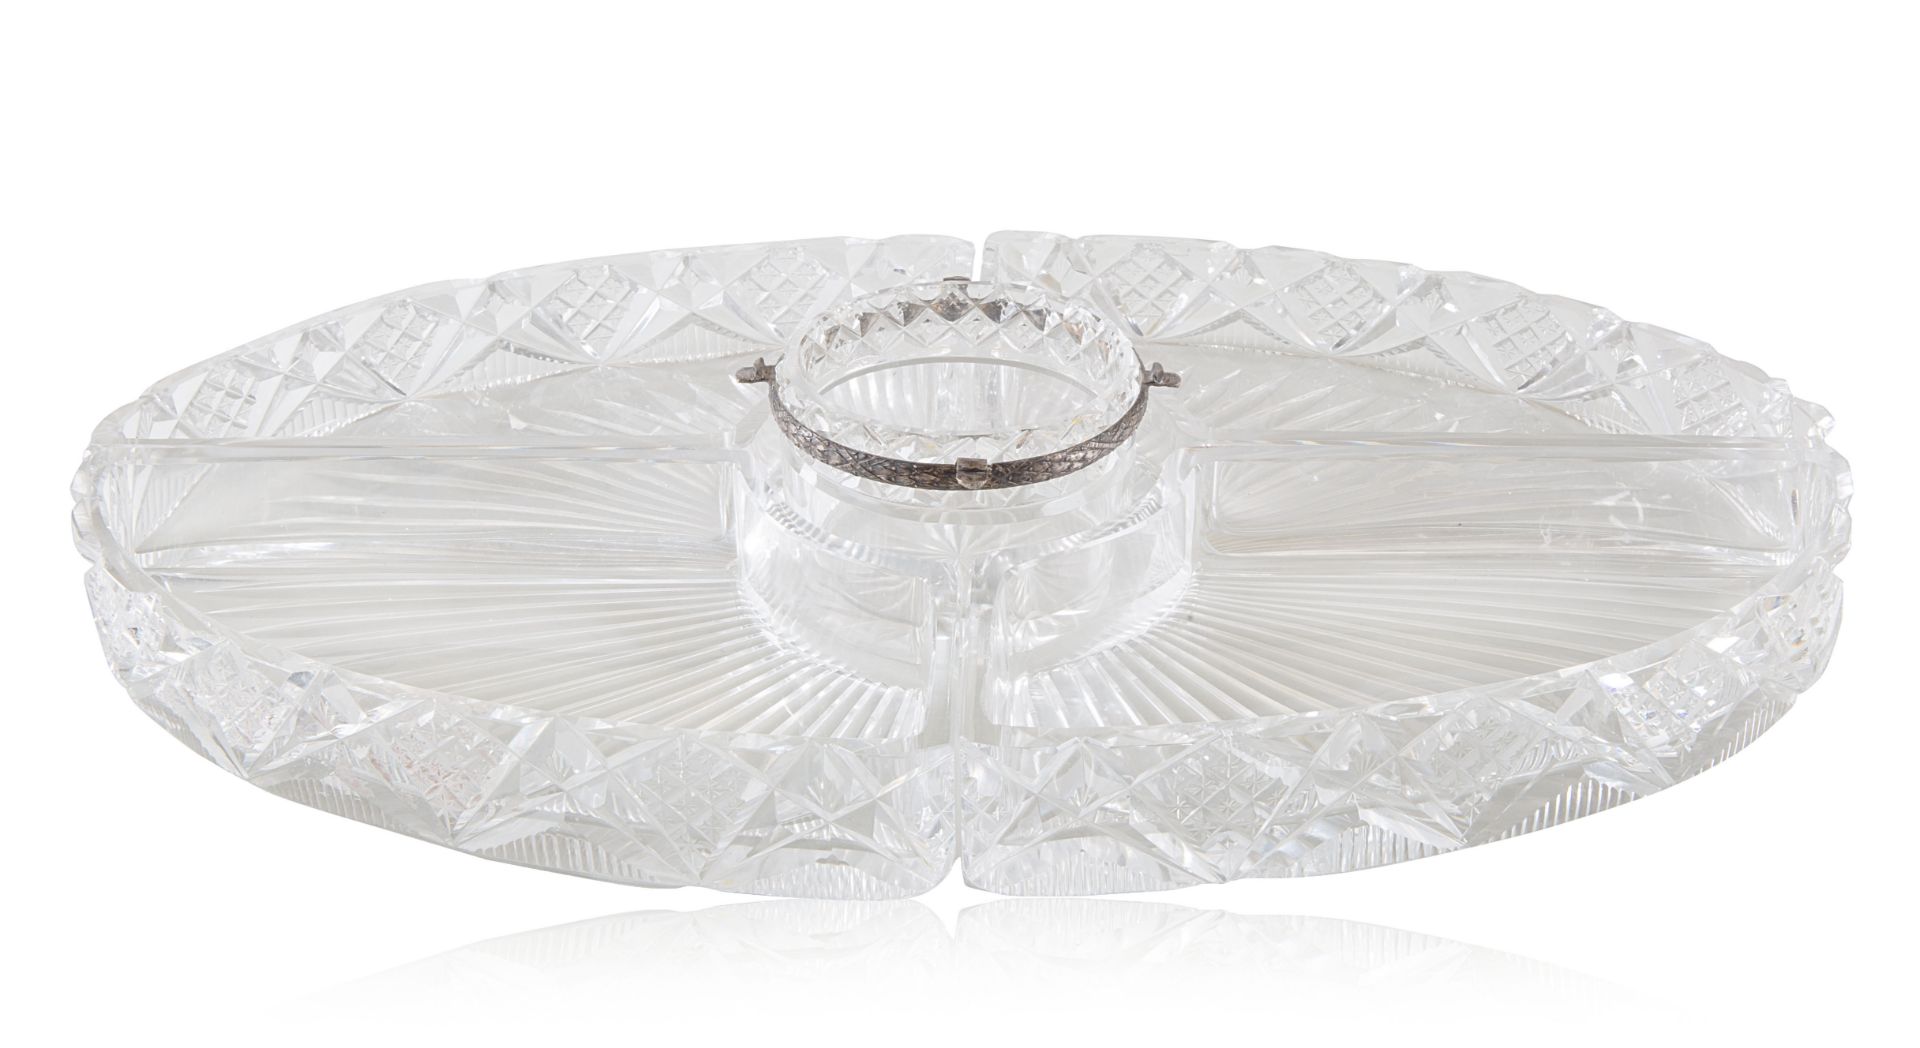 A BRITISH SILVER SERVING TRAY AND CRYSTAL HORS D'OEUVRE FIVE-PIECE SET, ERICH KELLERMAN, 19TH CENTUR - Image 3 of 3